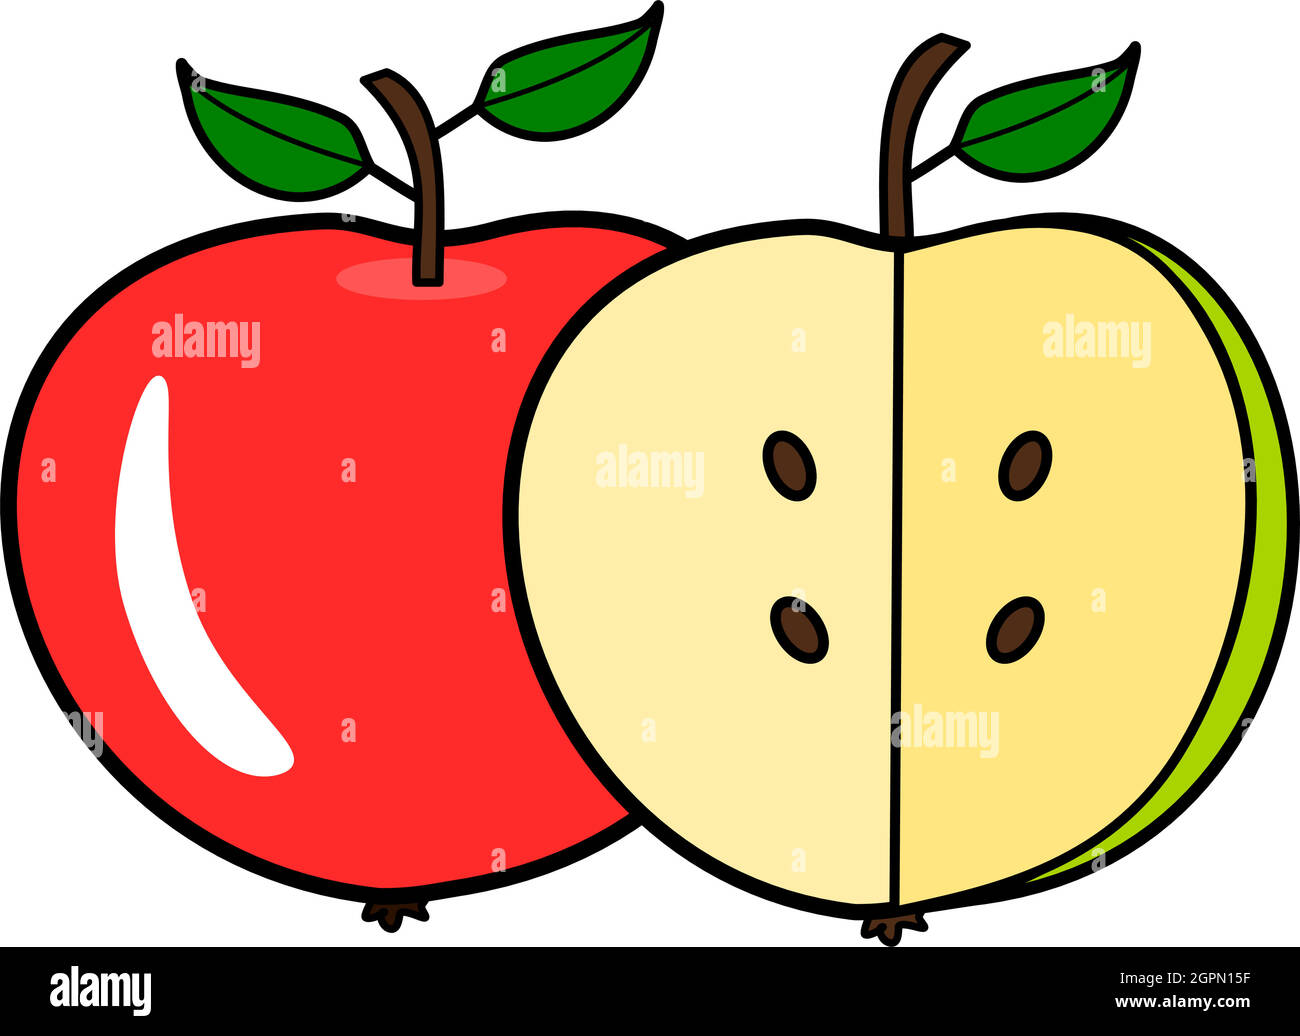 One and a half apples Stock Vector